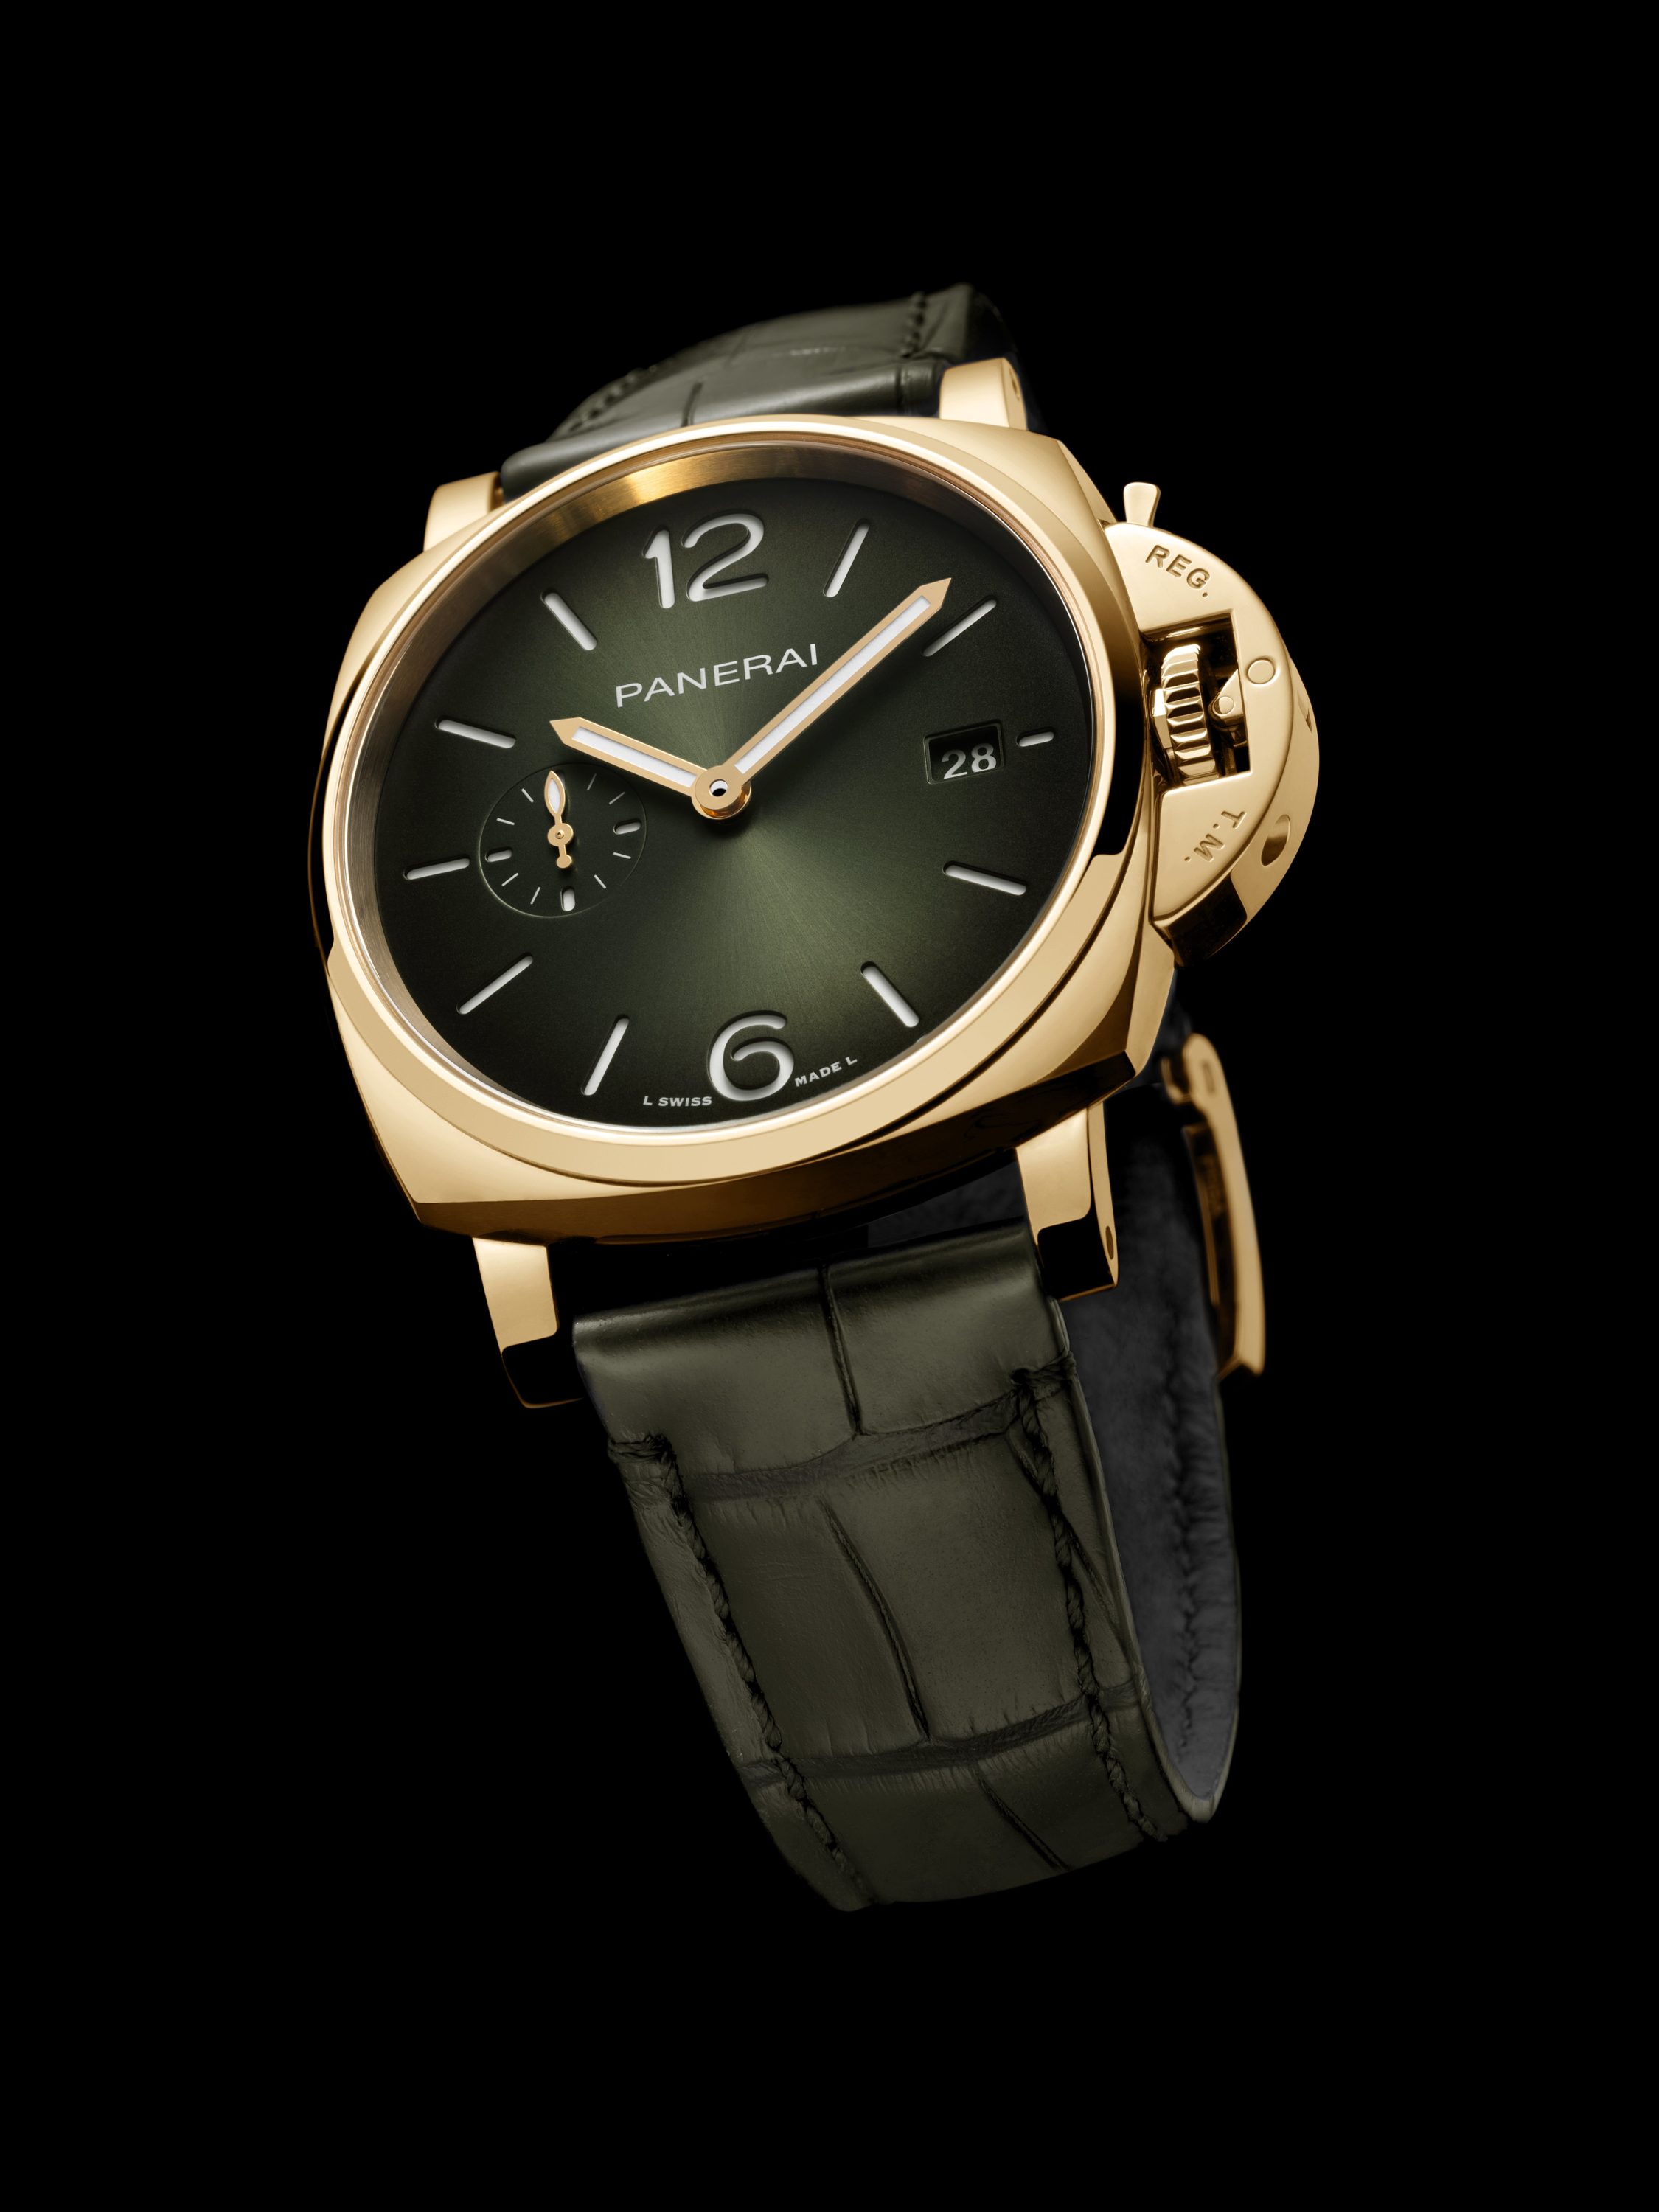 Green Meets Gold in Panerai’s Latest Luminor Due PAM01423